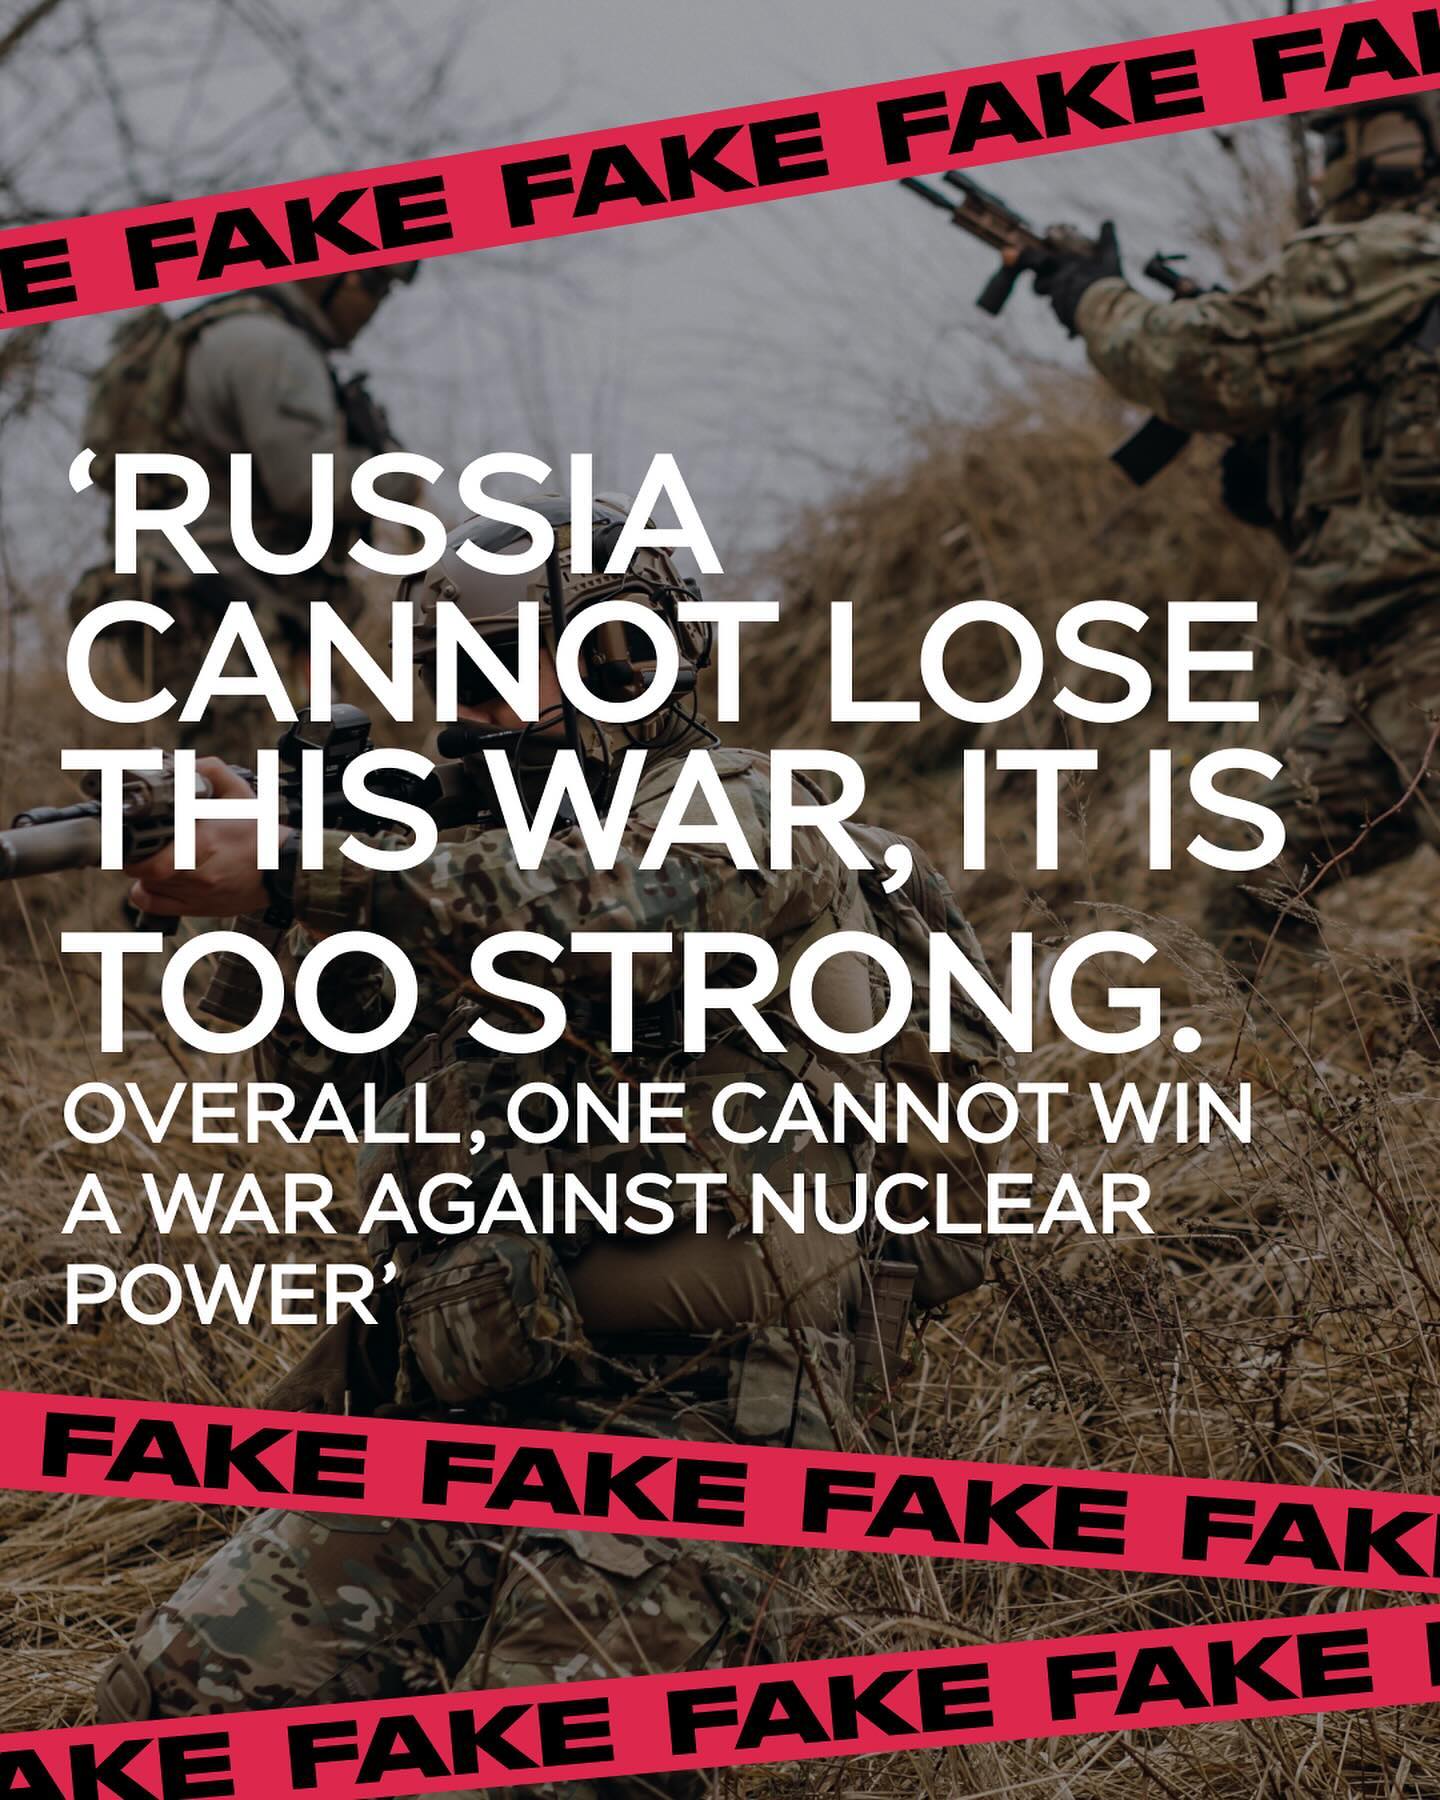 The campaign is aimed at unraveling fake narratives about Ukraine and highlighting the truth